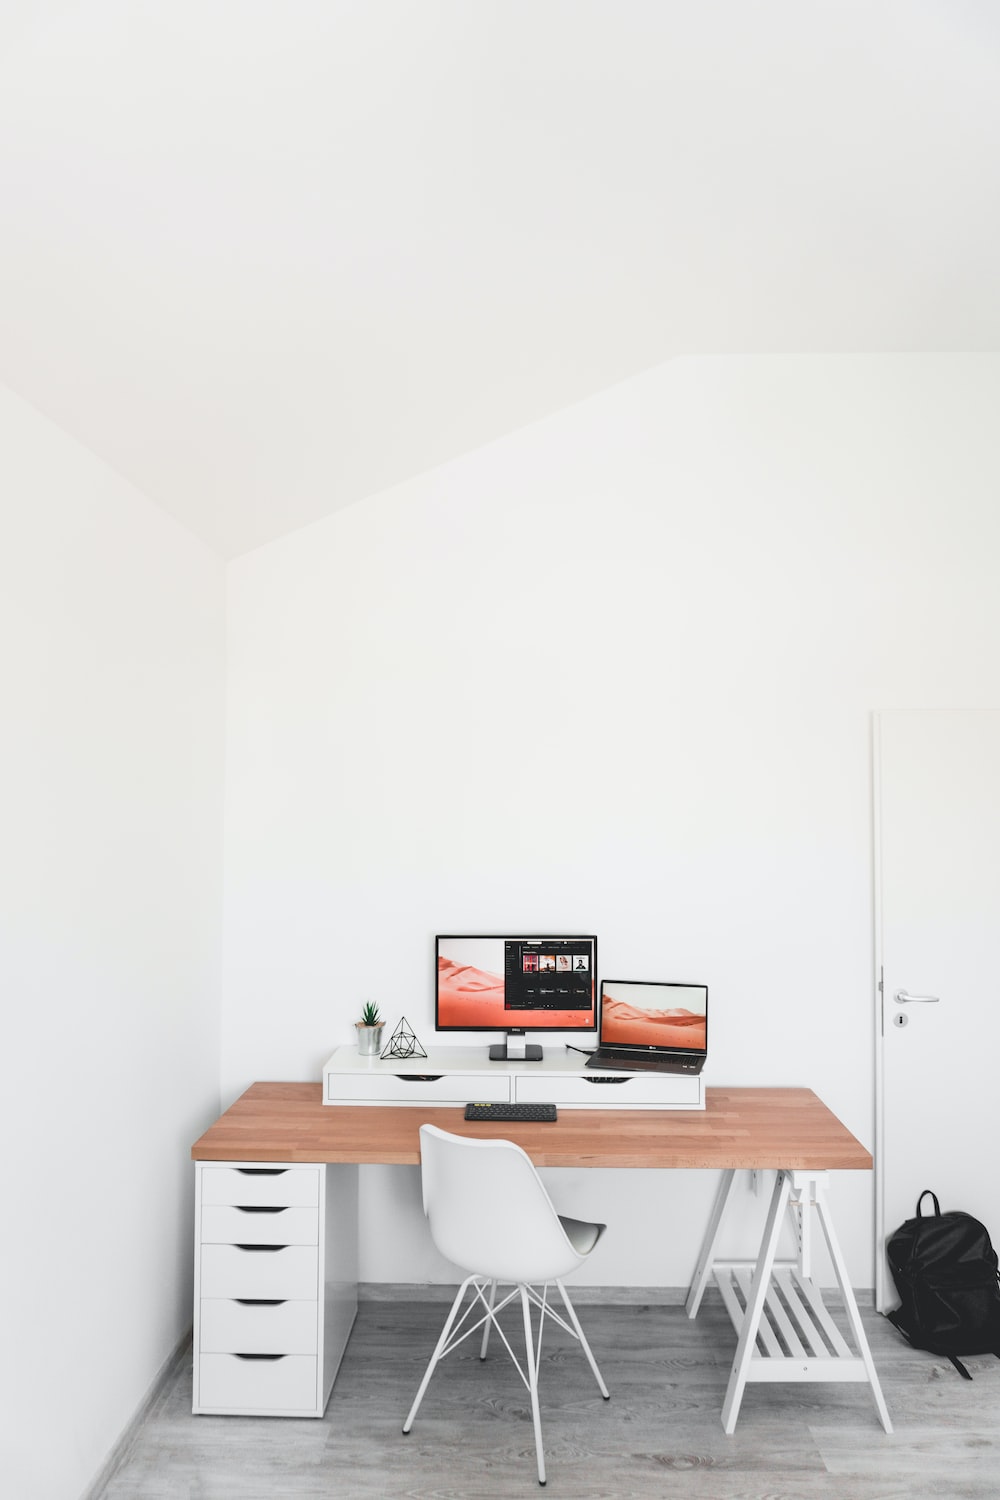 Is having a desk important?